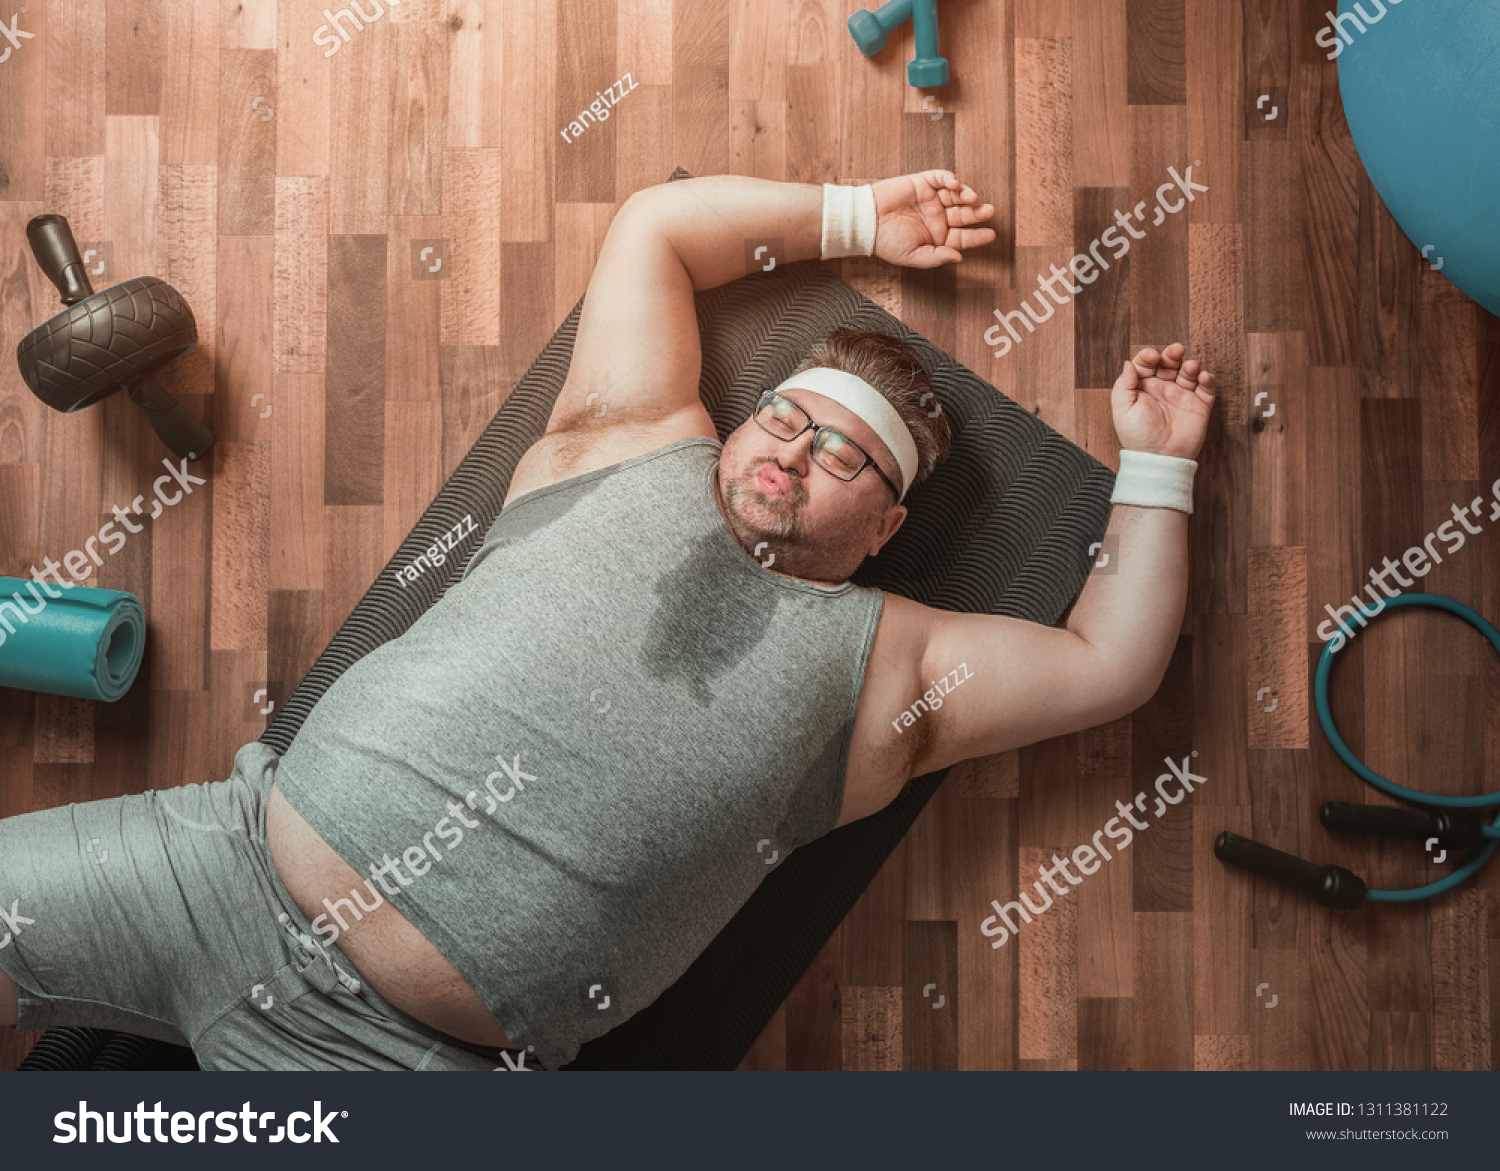 Funny overweight sportsman lying exhausted down on the floor  #1311381122